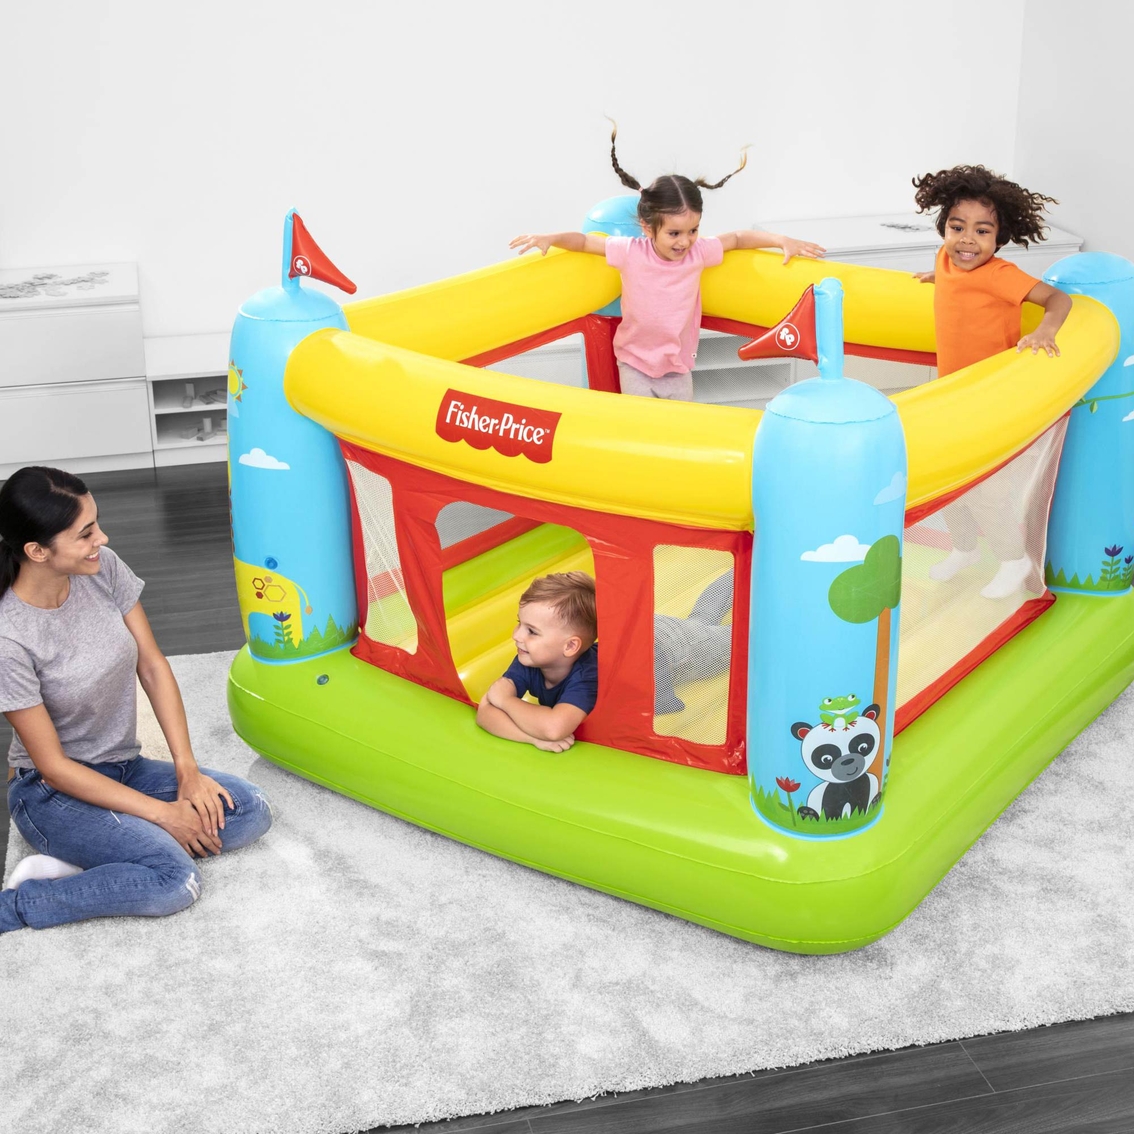 Fisher-Price Bouncetastic Bouncer - Image 4 of 5